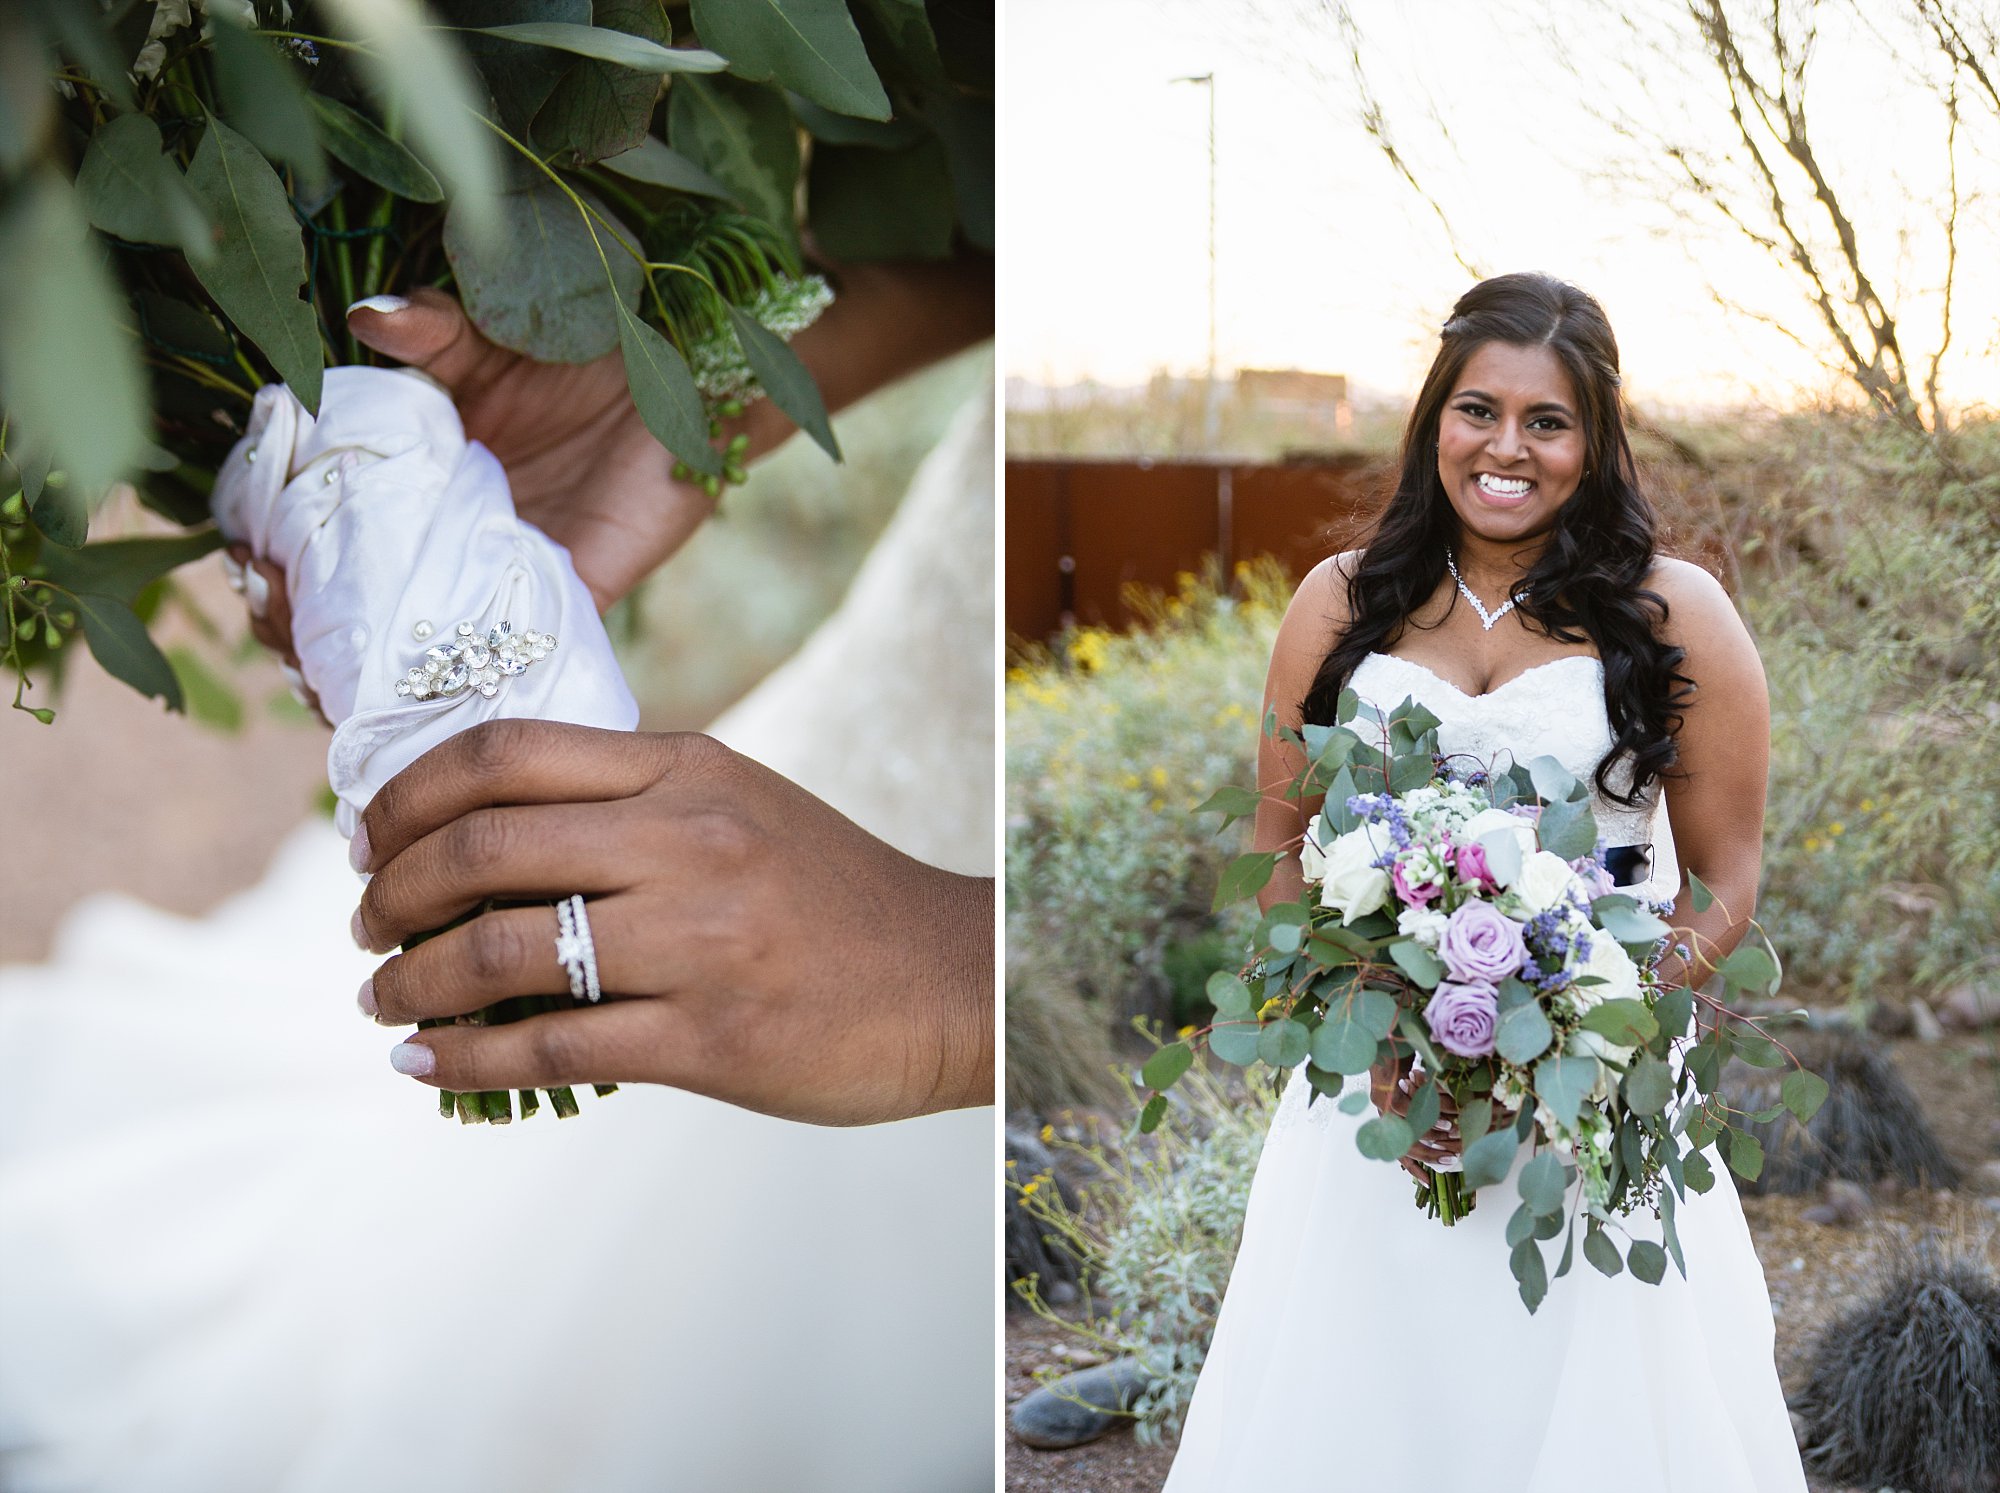 Image of bride's mother's wedding gloves wrapped around her bouquet and an image of the bride holding lavender and white bouquet at her desert wedding by Phoenix wedding photographer PMA Photography.